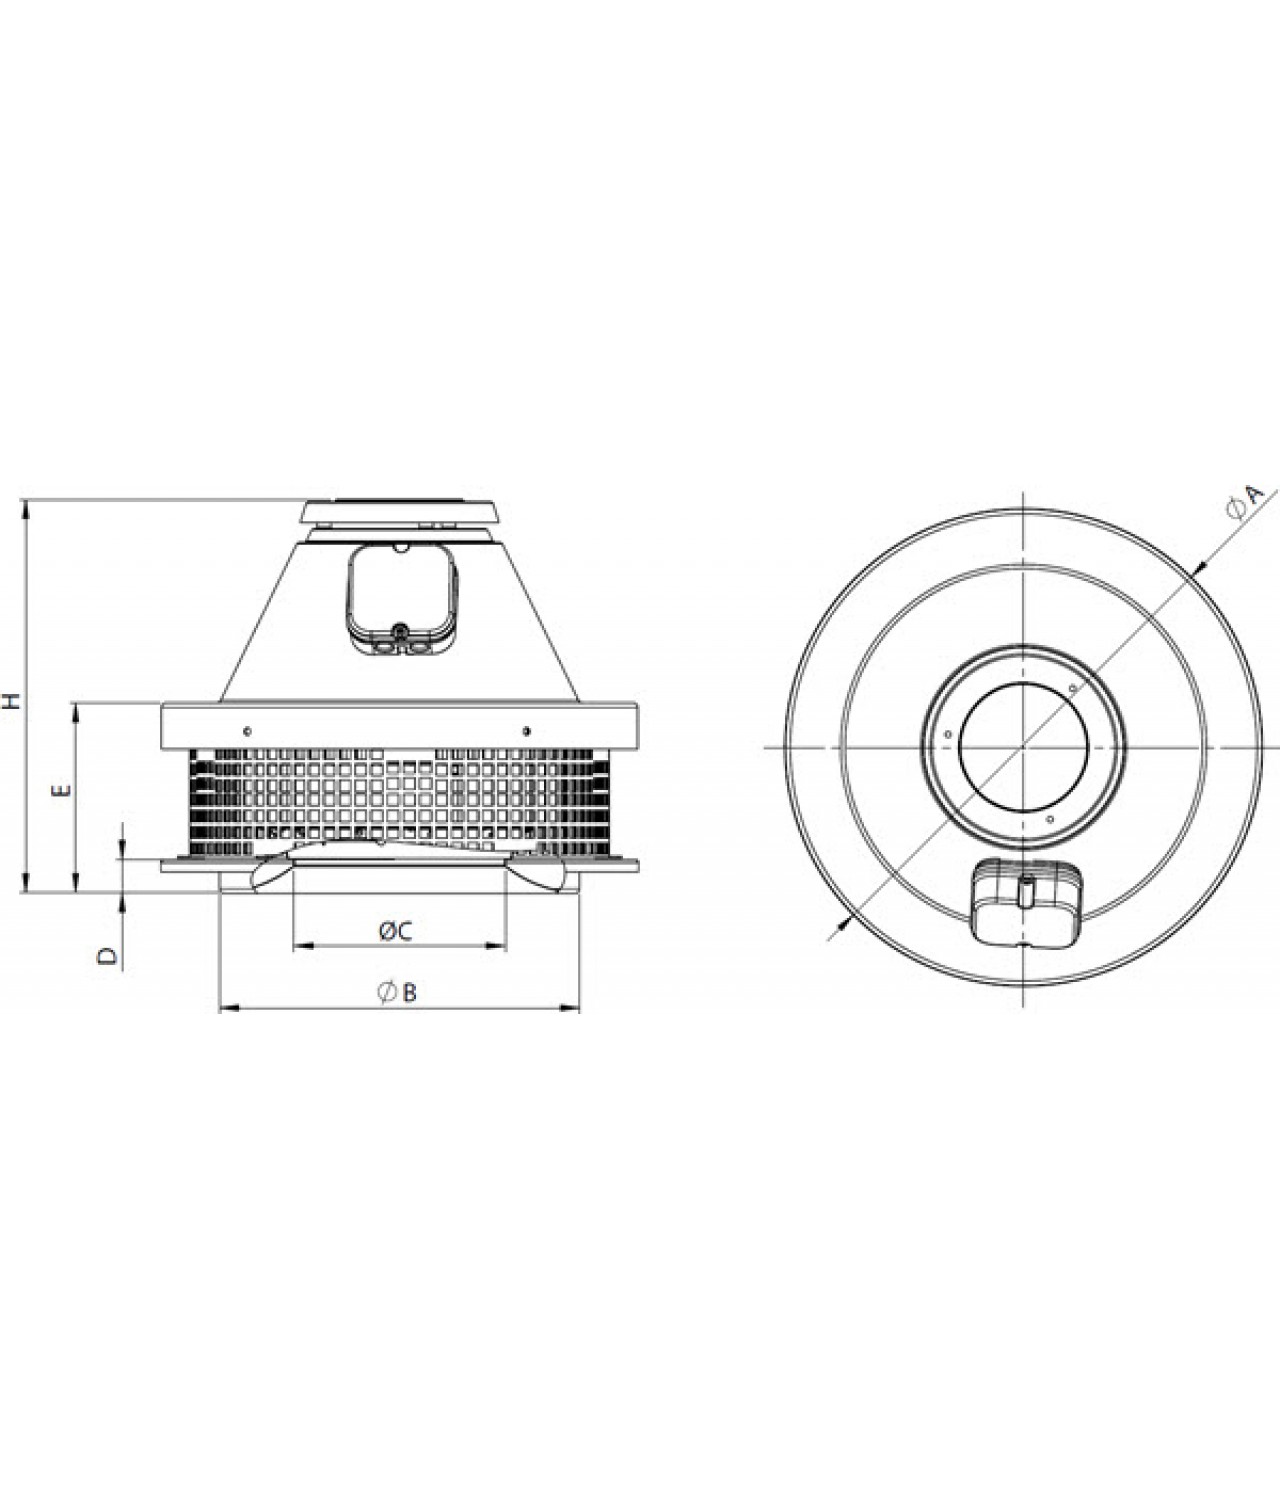 Roof fans for hot air HEAT ≤1965 m³/h - drawing